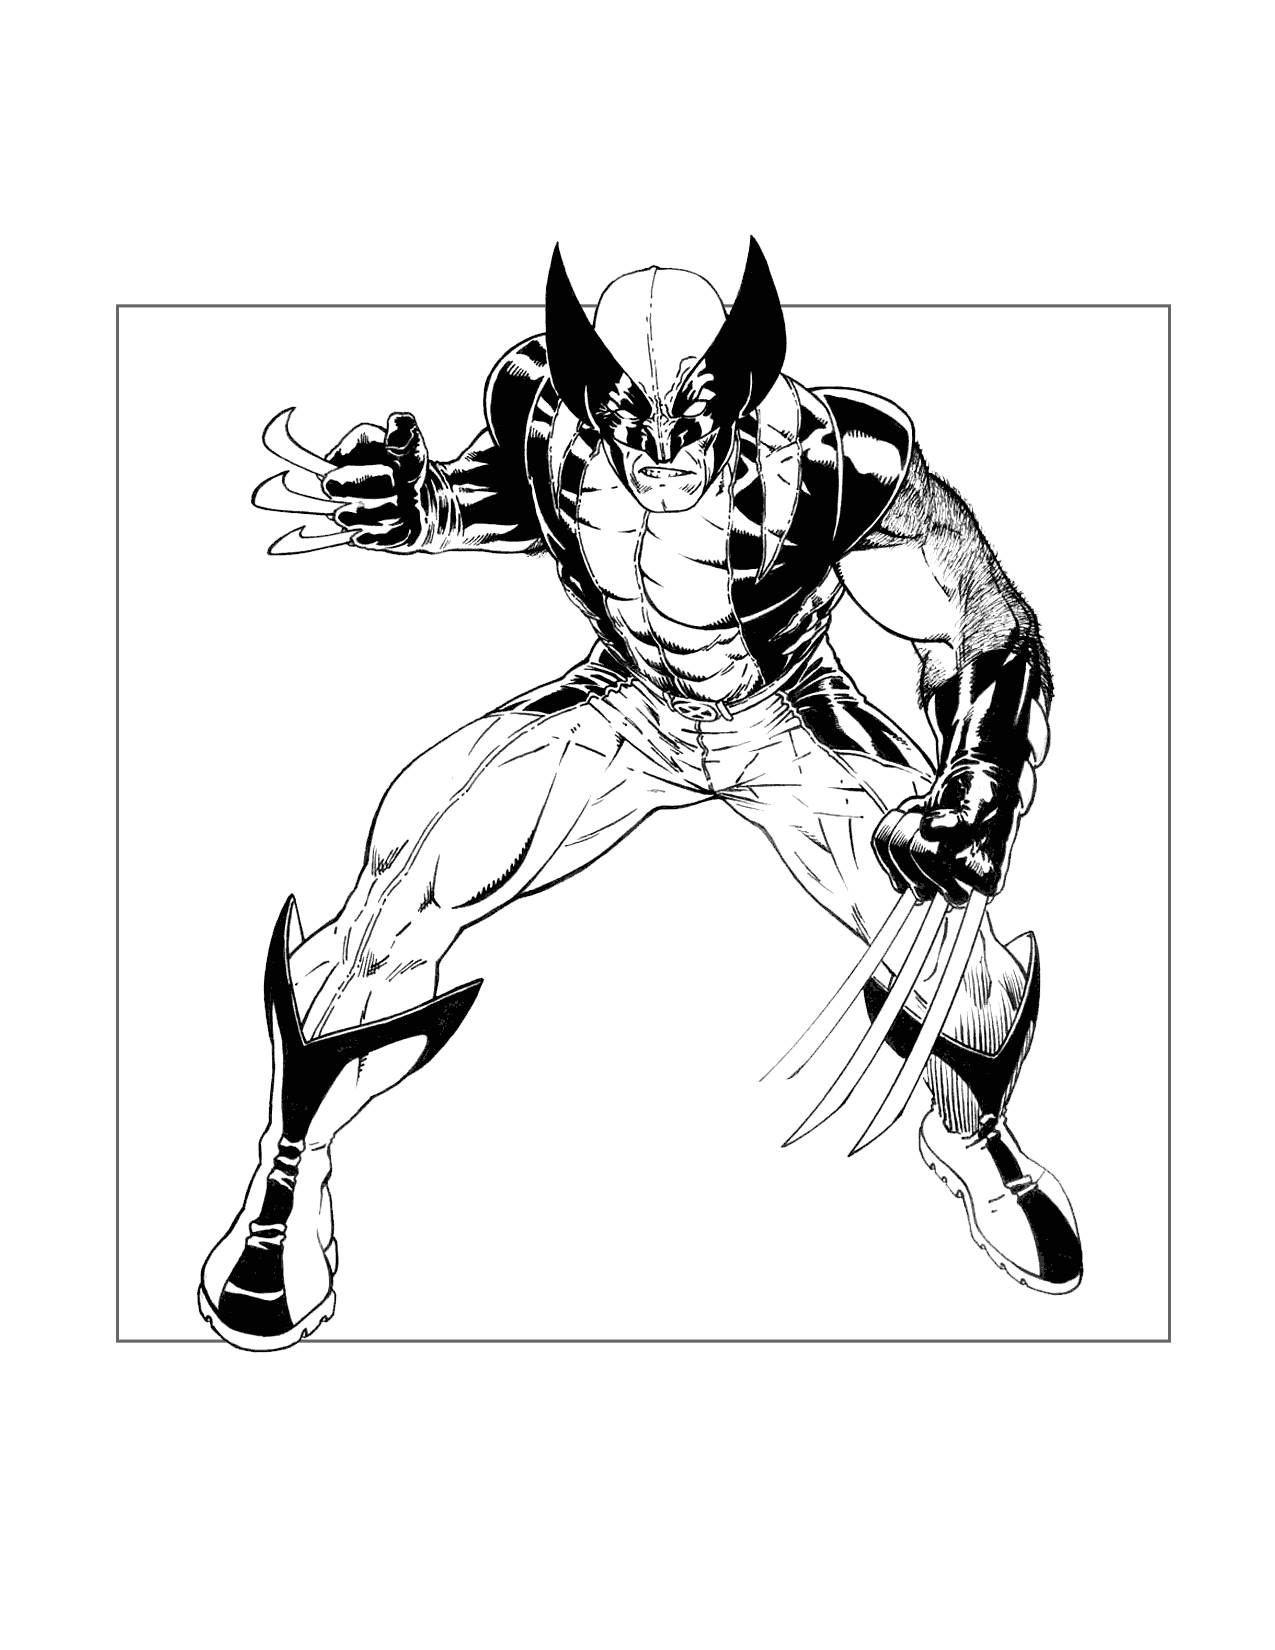 Cool Wolverine Coloring Page